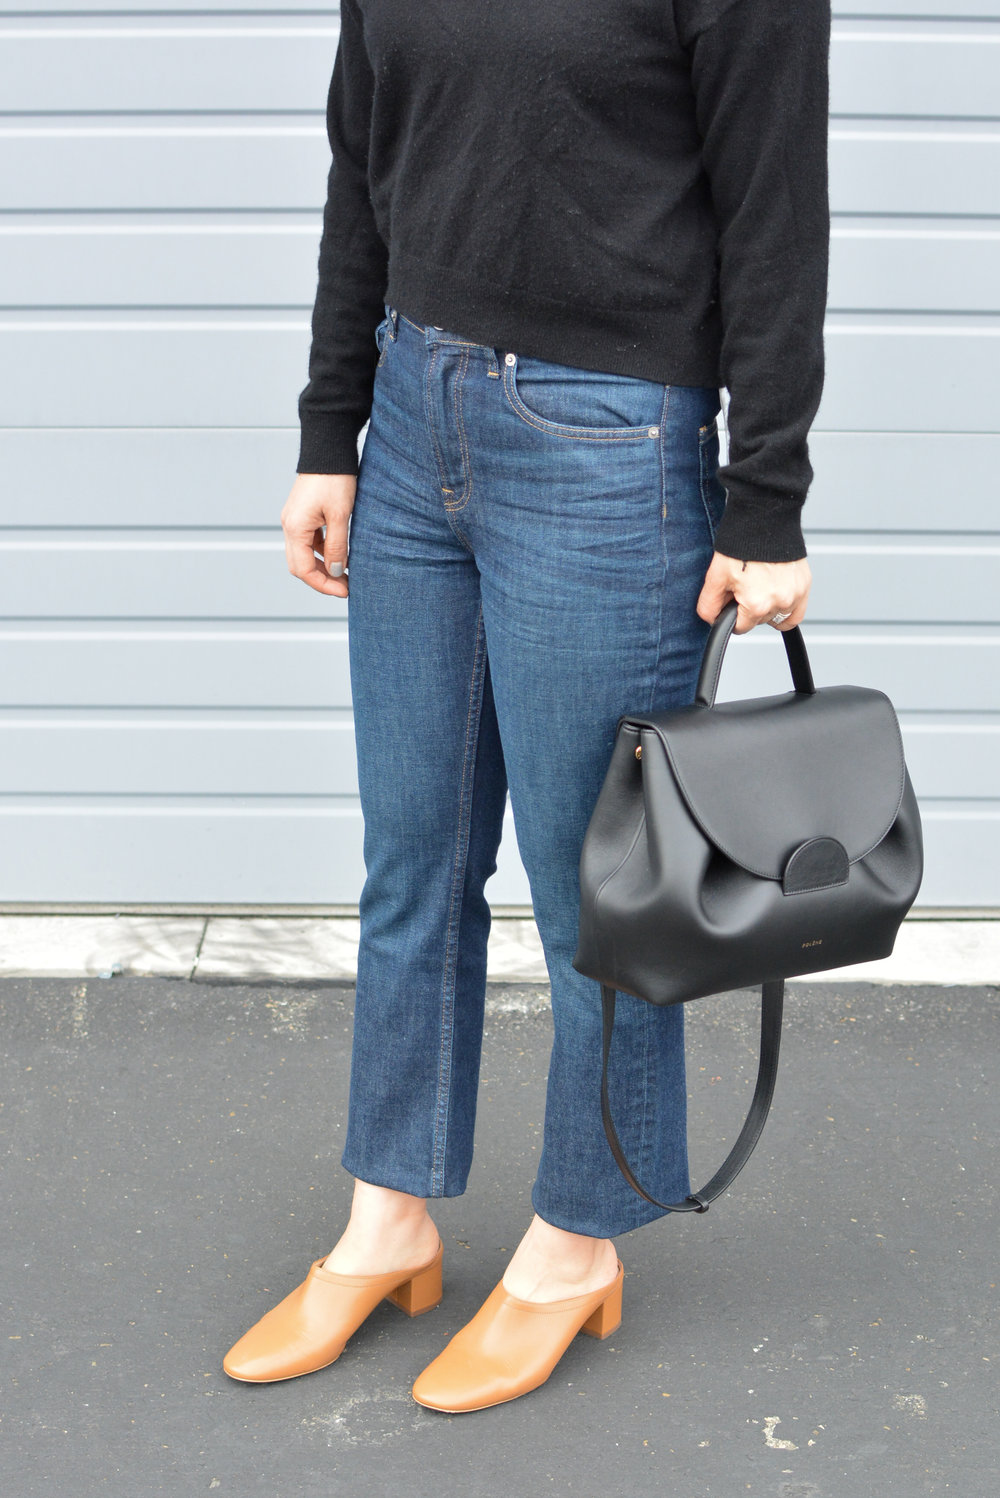 Everlane Review The Day Heel Mule 